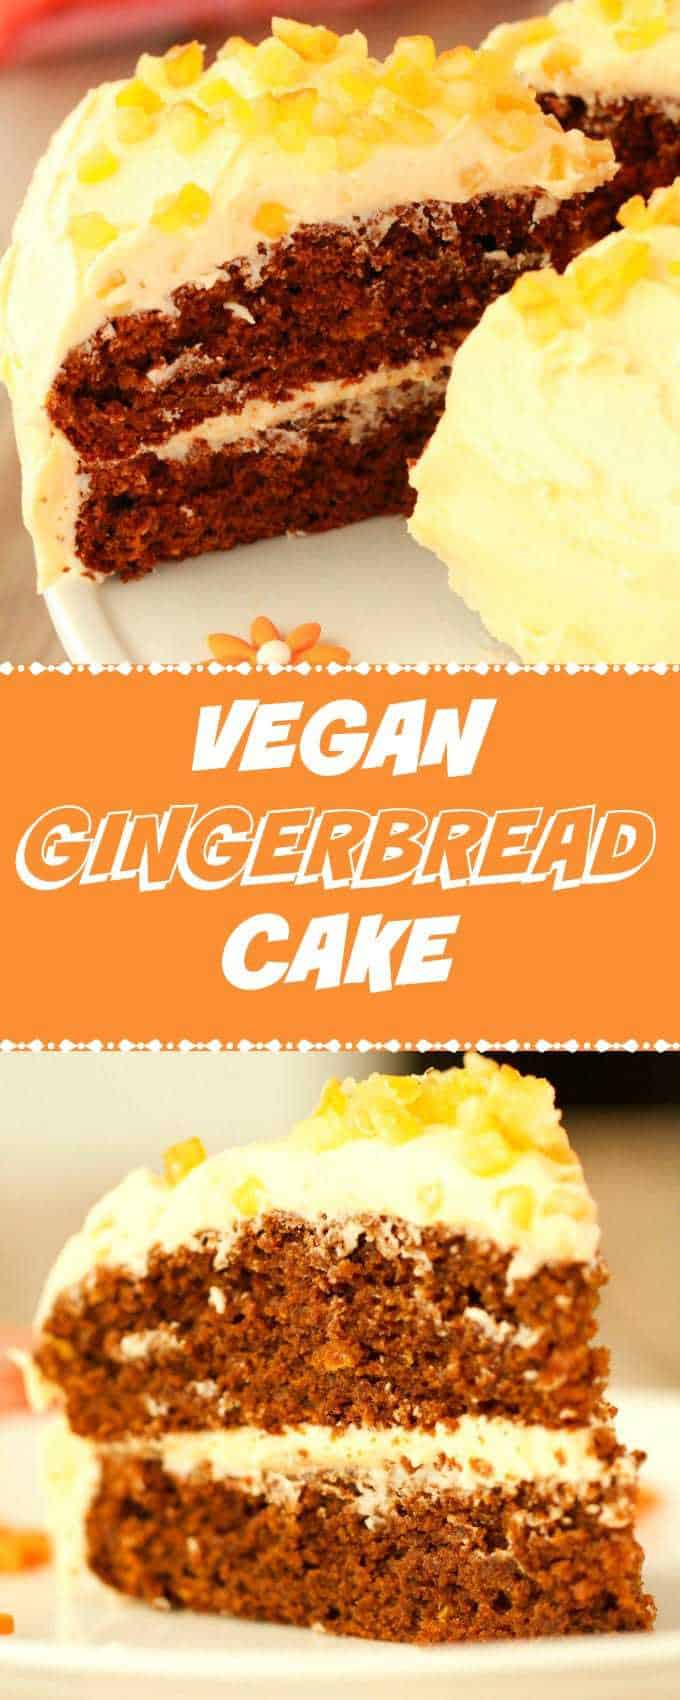 gingerbread cake with orange frosting